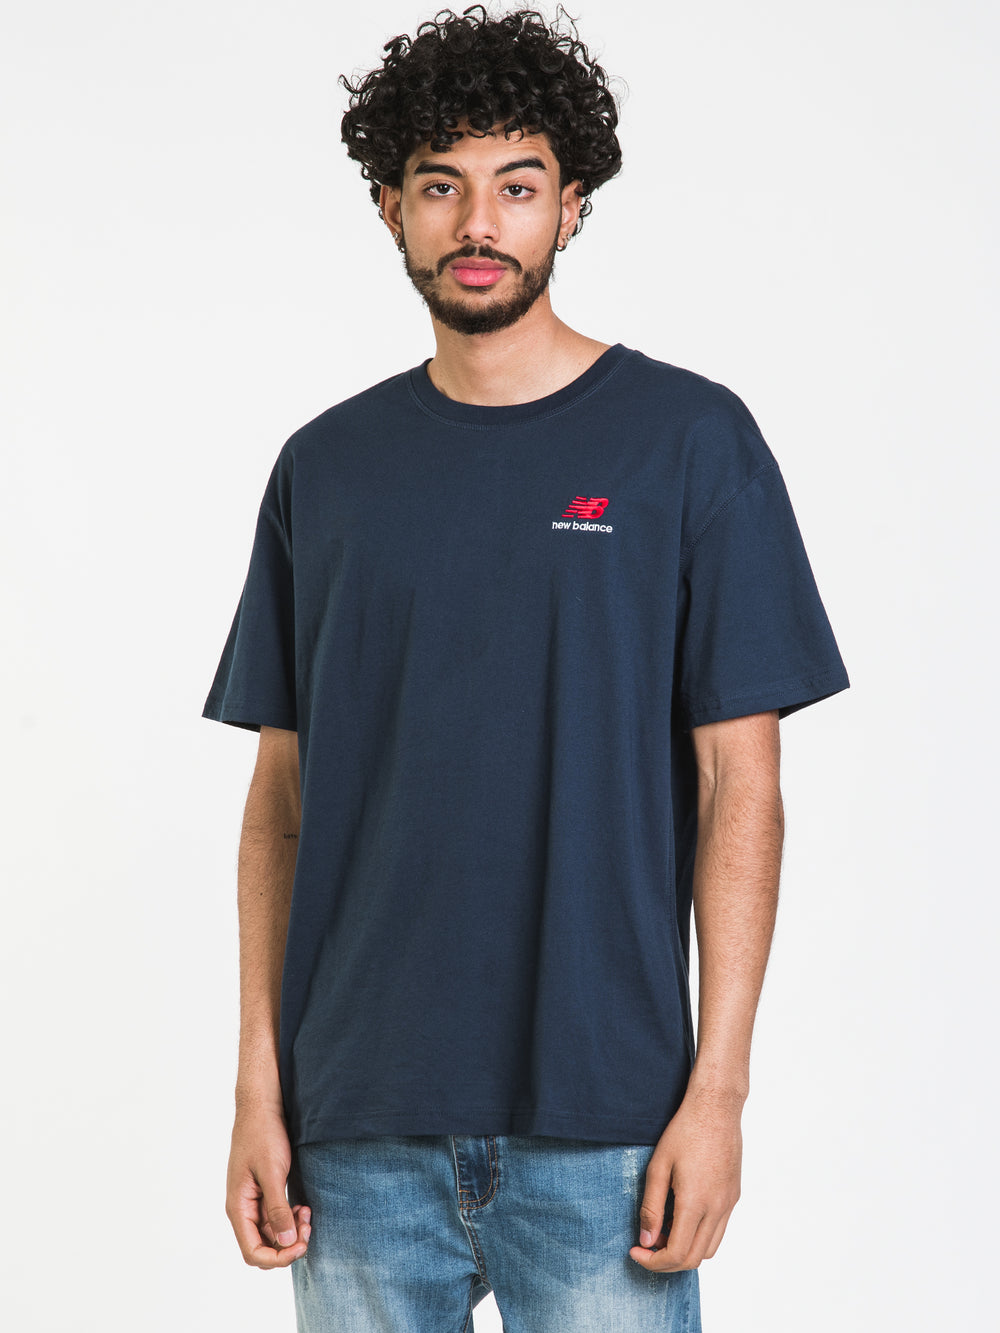 NEW BALANCE ESSENTIALS EMBROIDERED T-SHIRT - CLEARANCE